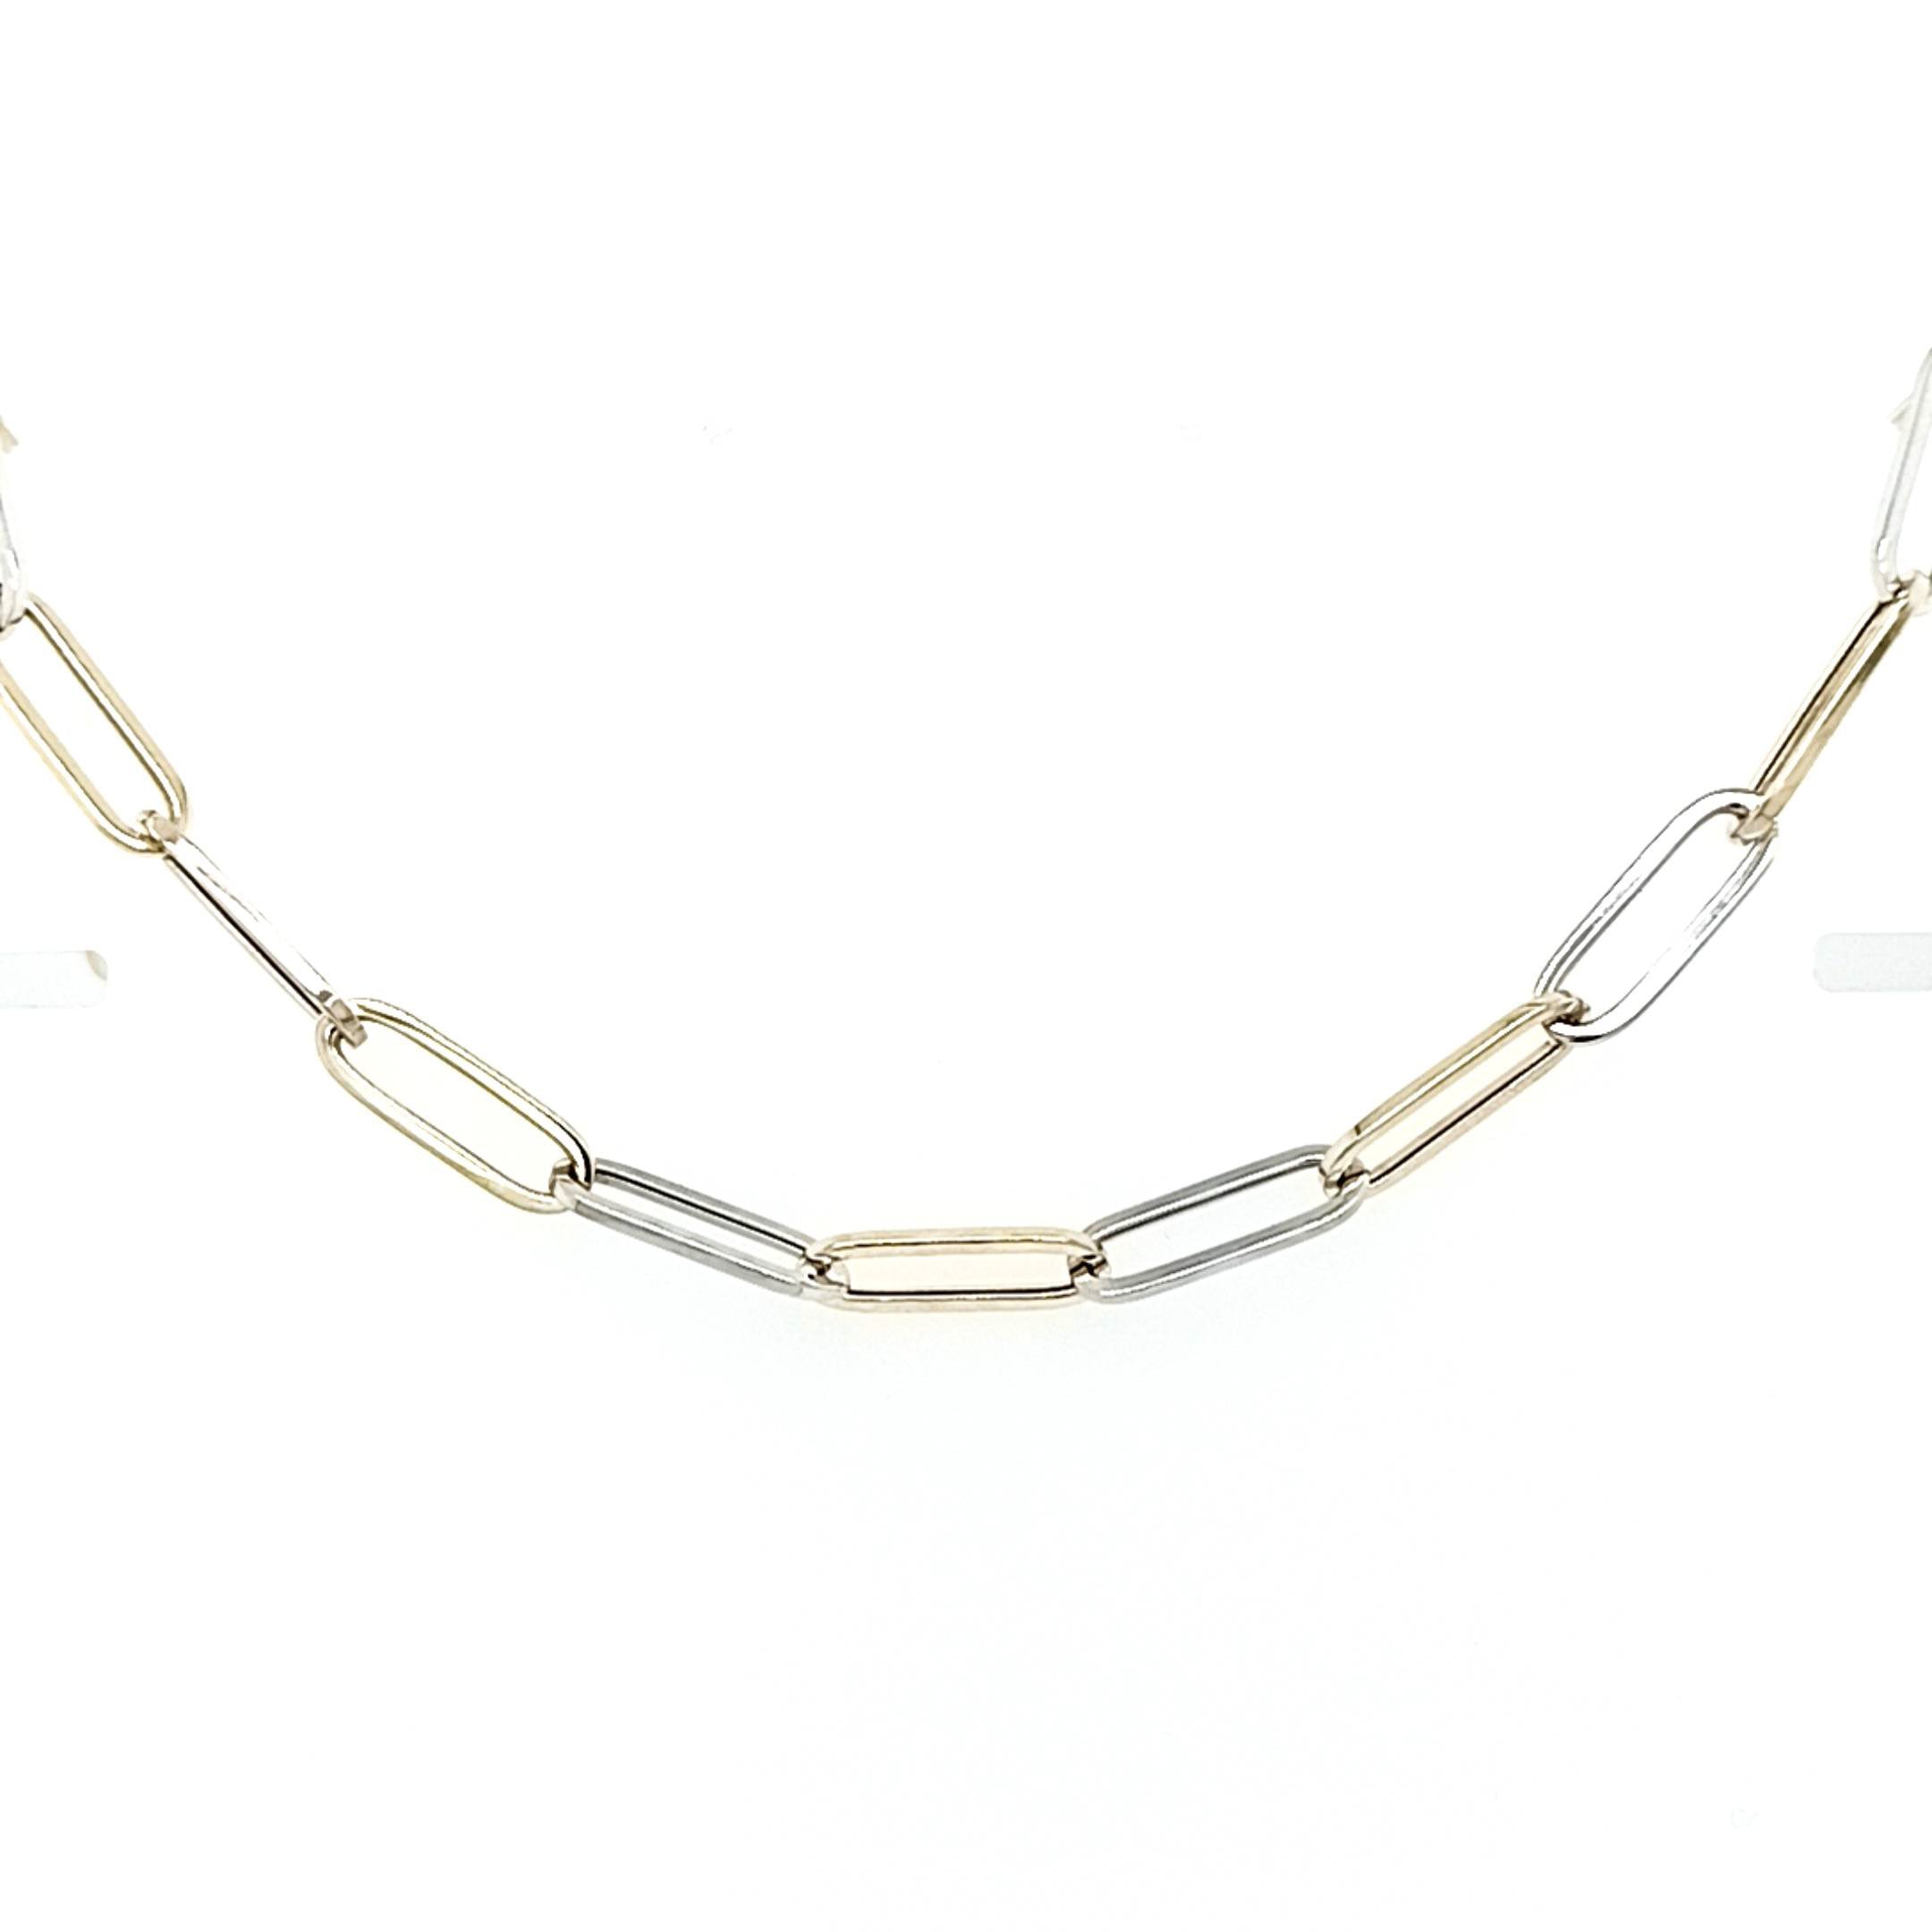 9ct Yellow and White Gold Long Link Necklace